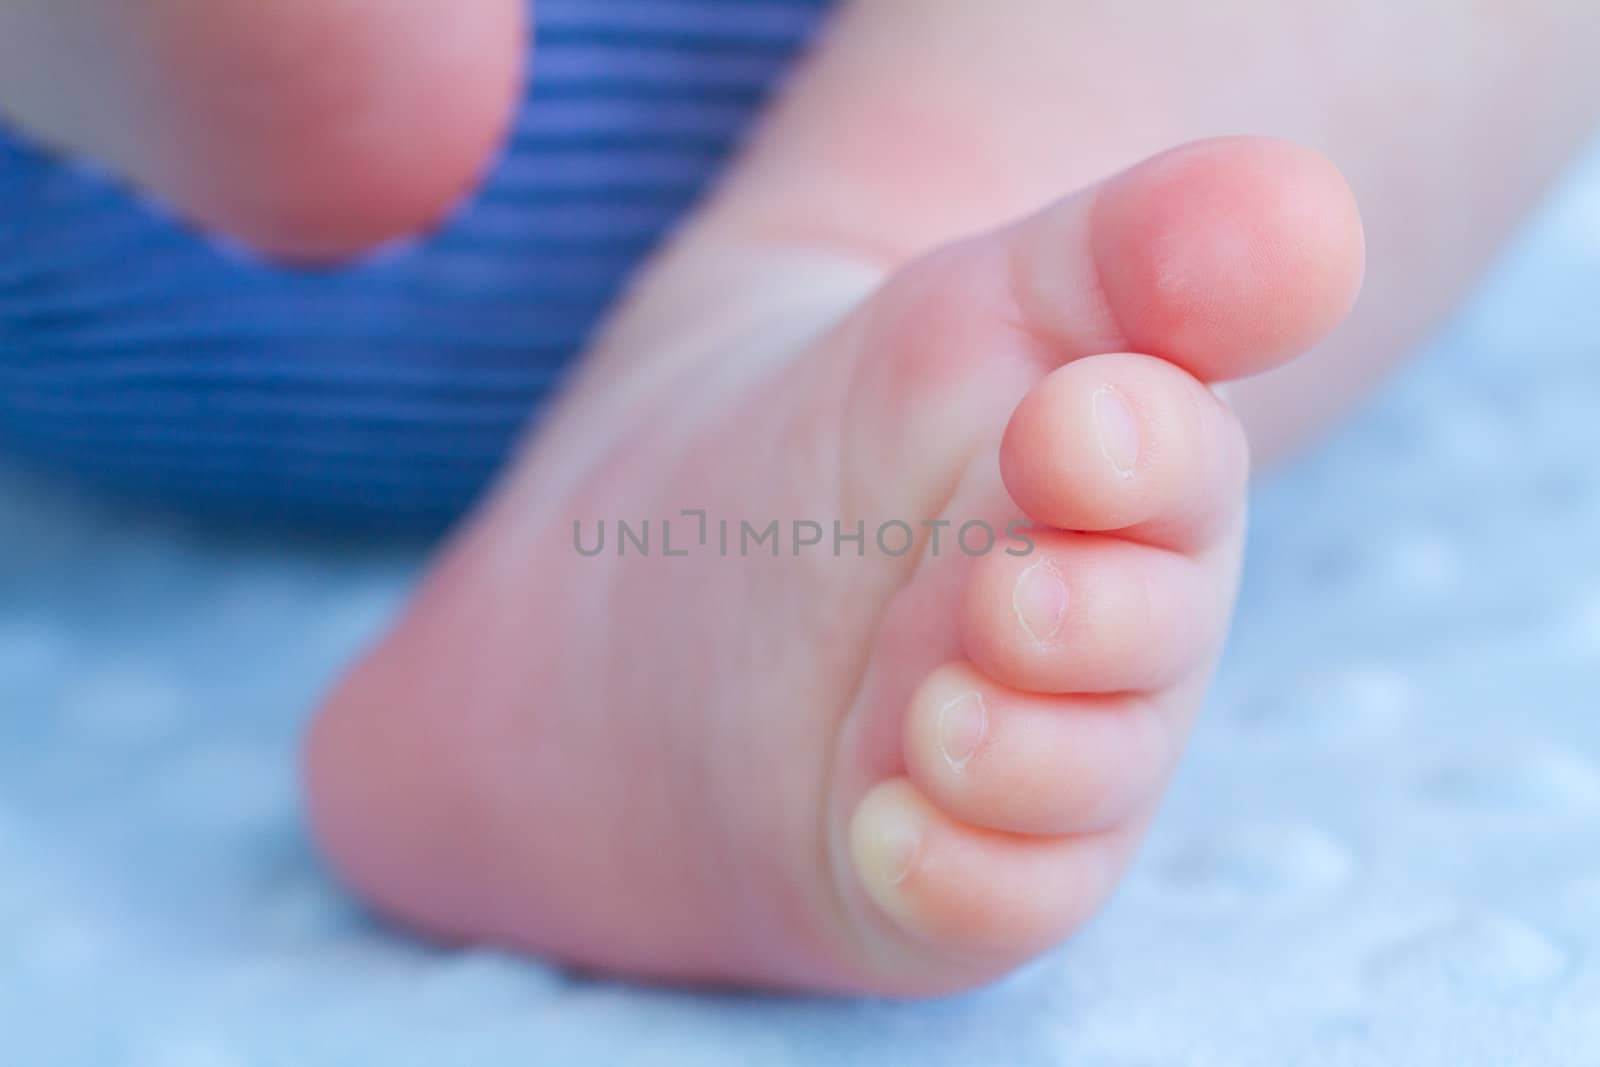 The feet of a newborn baby photographed from below outdoors.